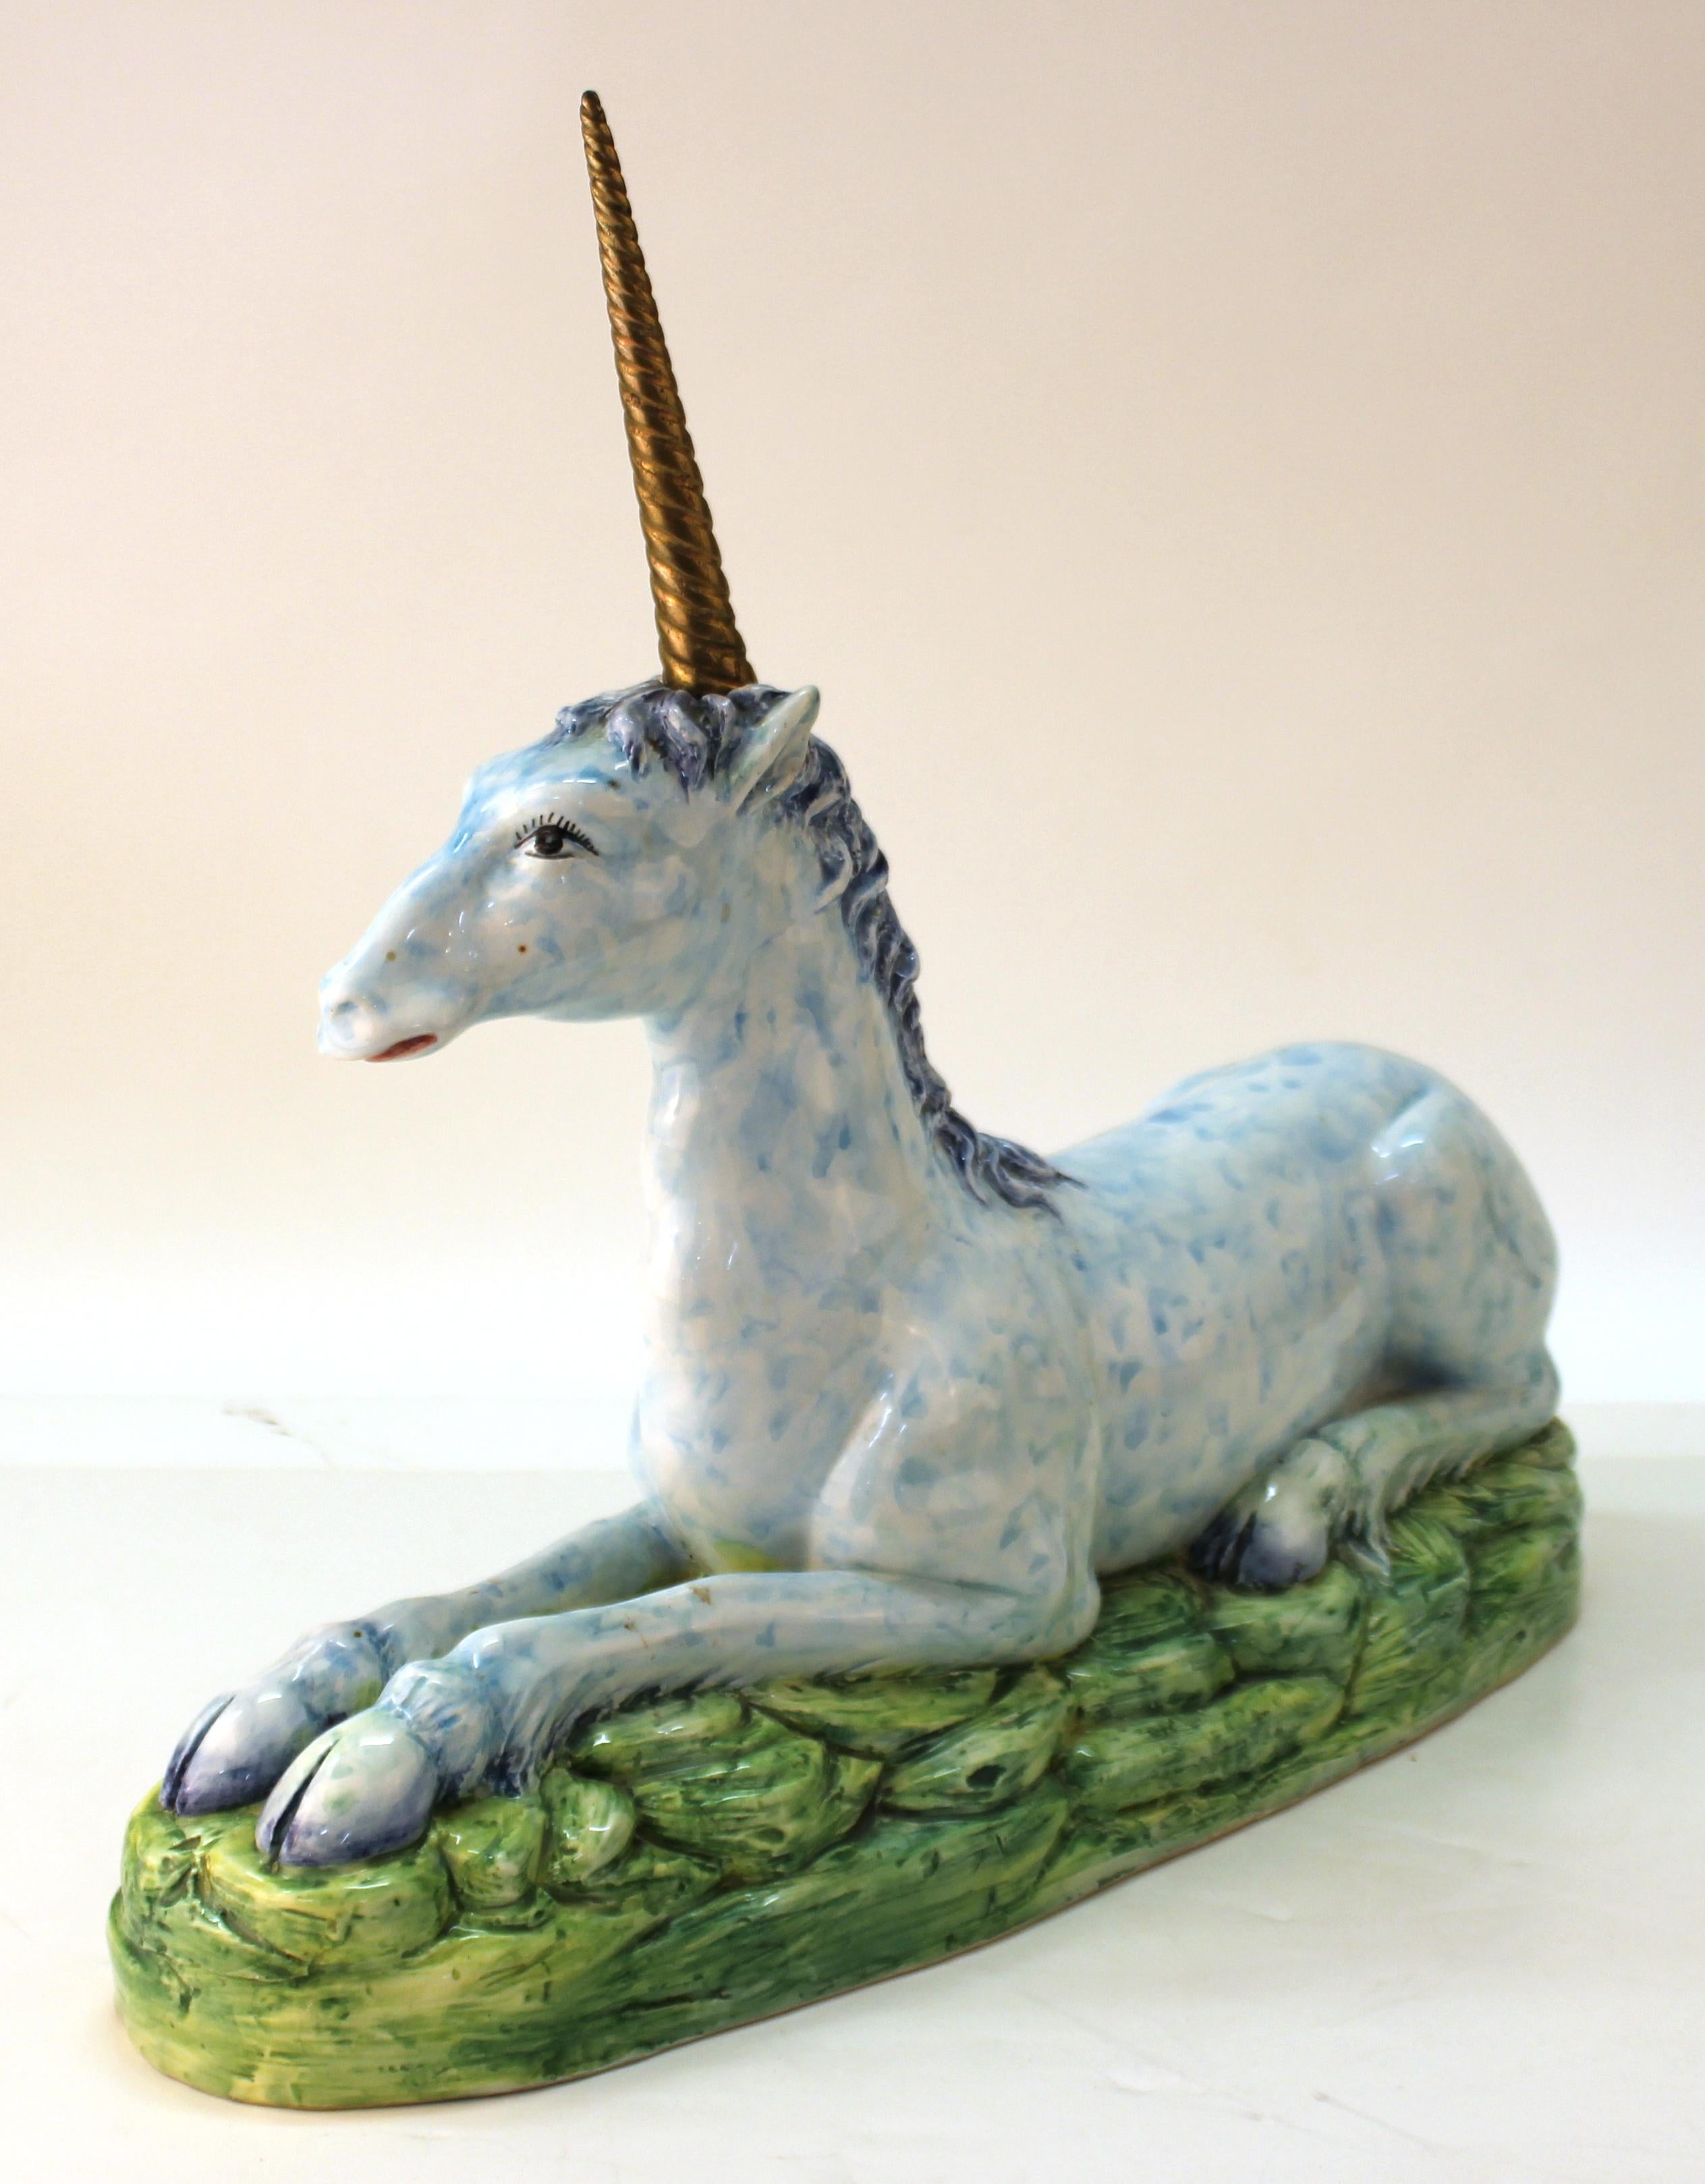 Italian modern glazed hand-painted ceramic sculpture of a blue unicorn with a removable brass Horn. The piece is marked 'Italy' underneath and shows minor repair work above the proper right eye. In great vintage condition with age-appropriate patina